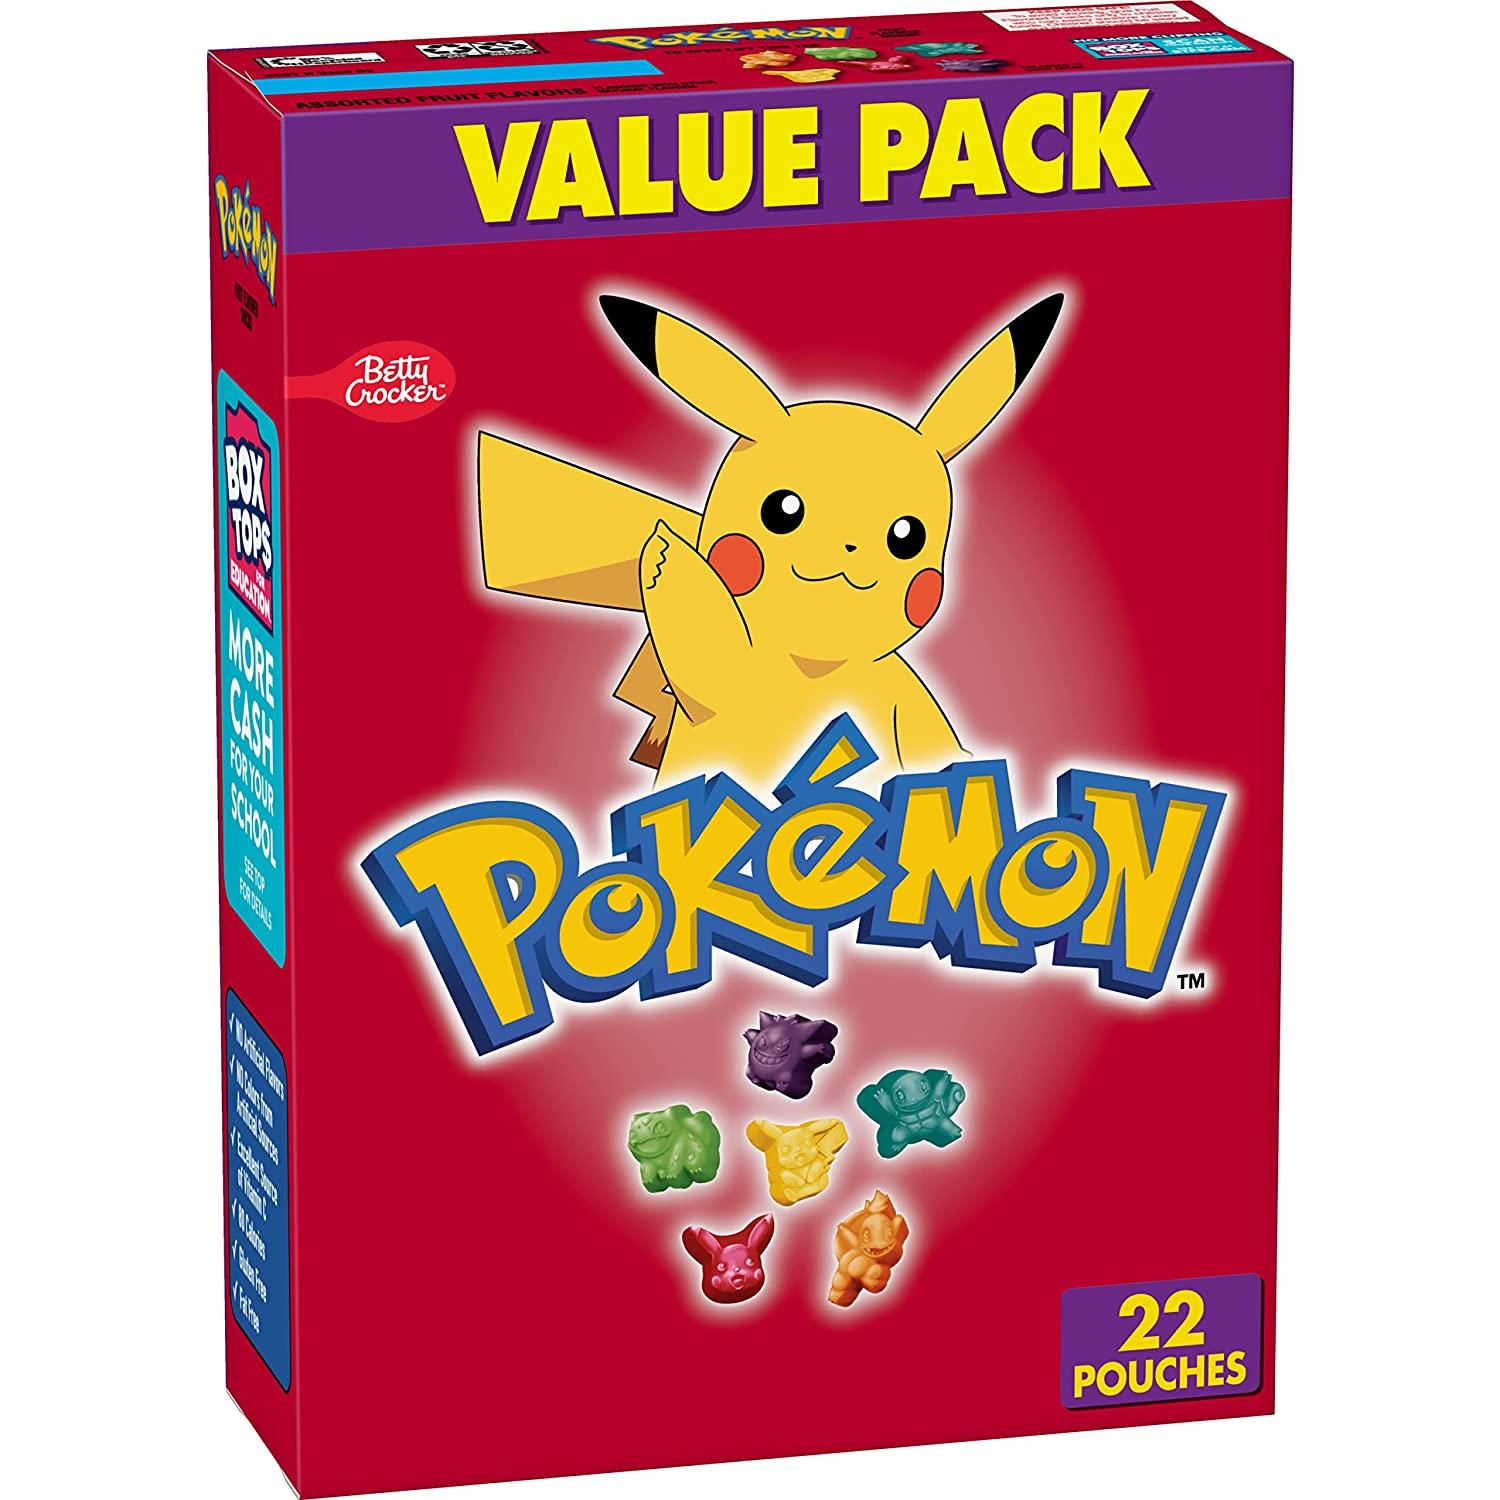 Pokemon Fruit Flavored Snacks Treat Pouches for $3.73 Shipped